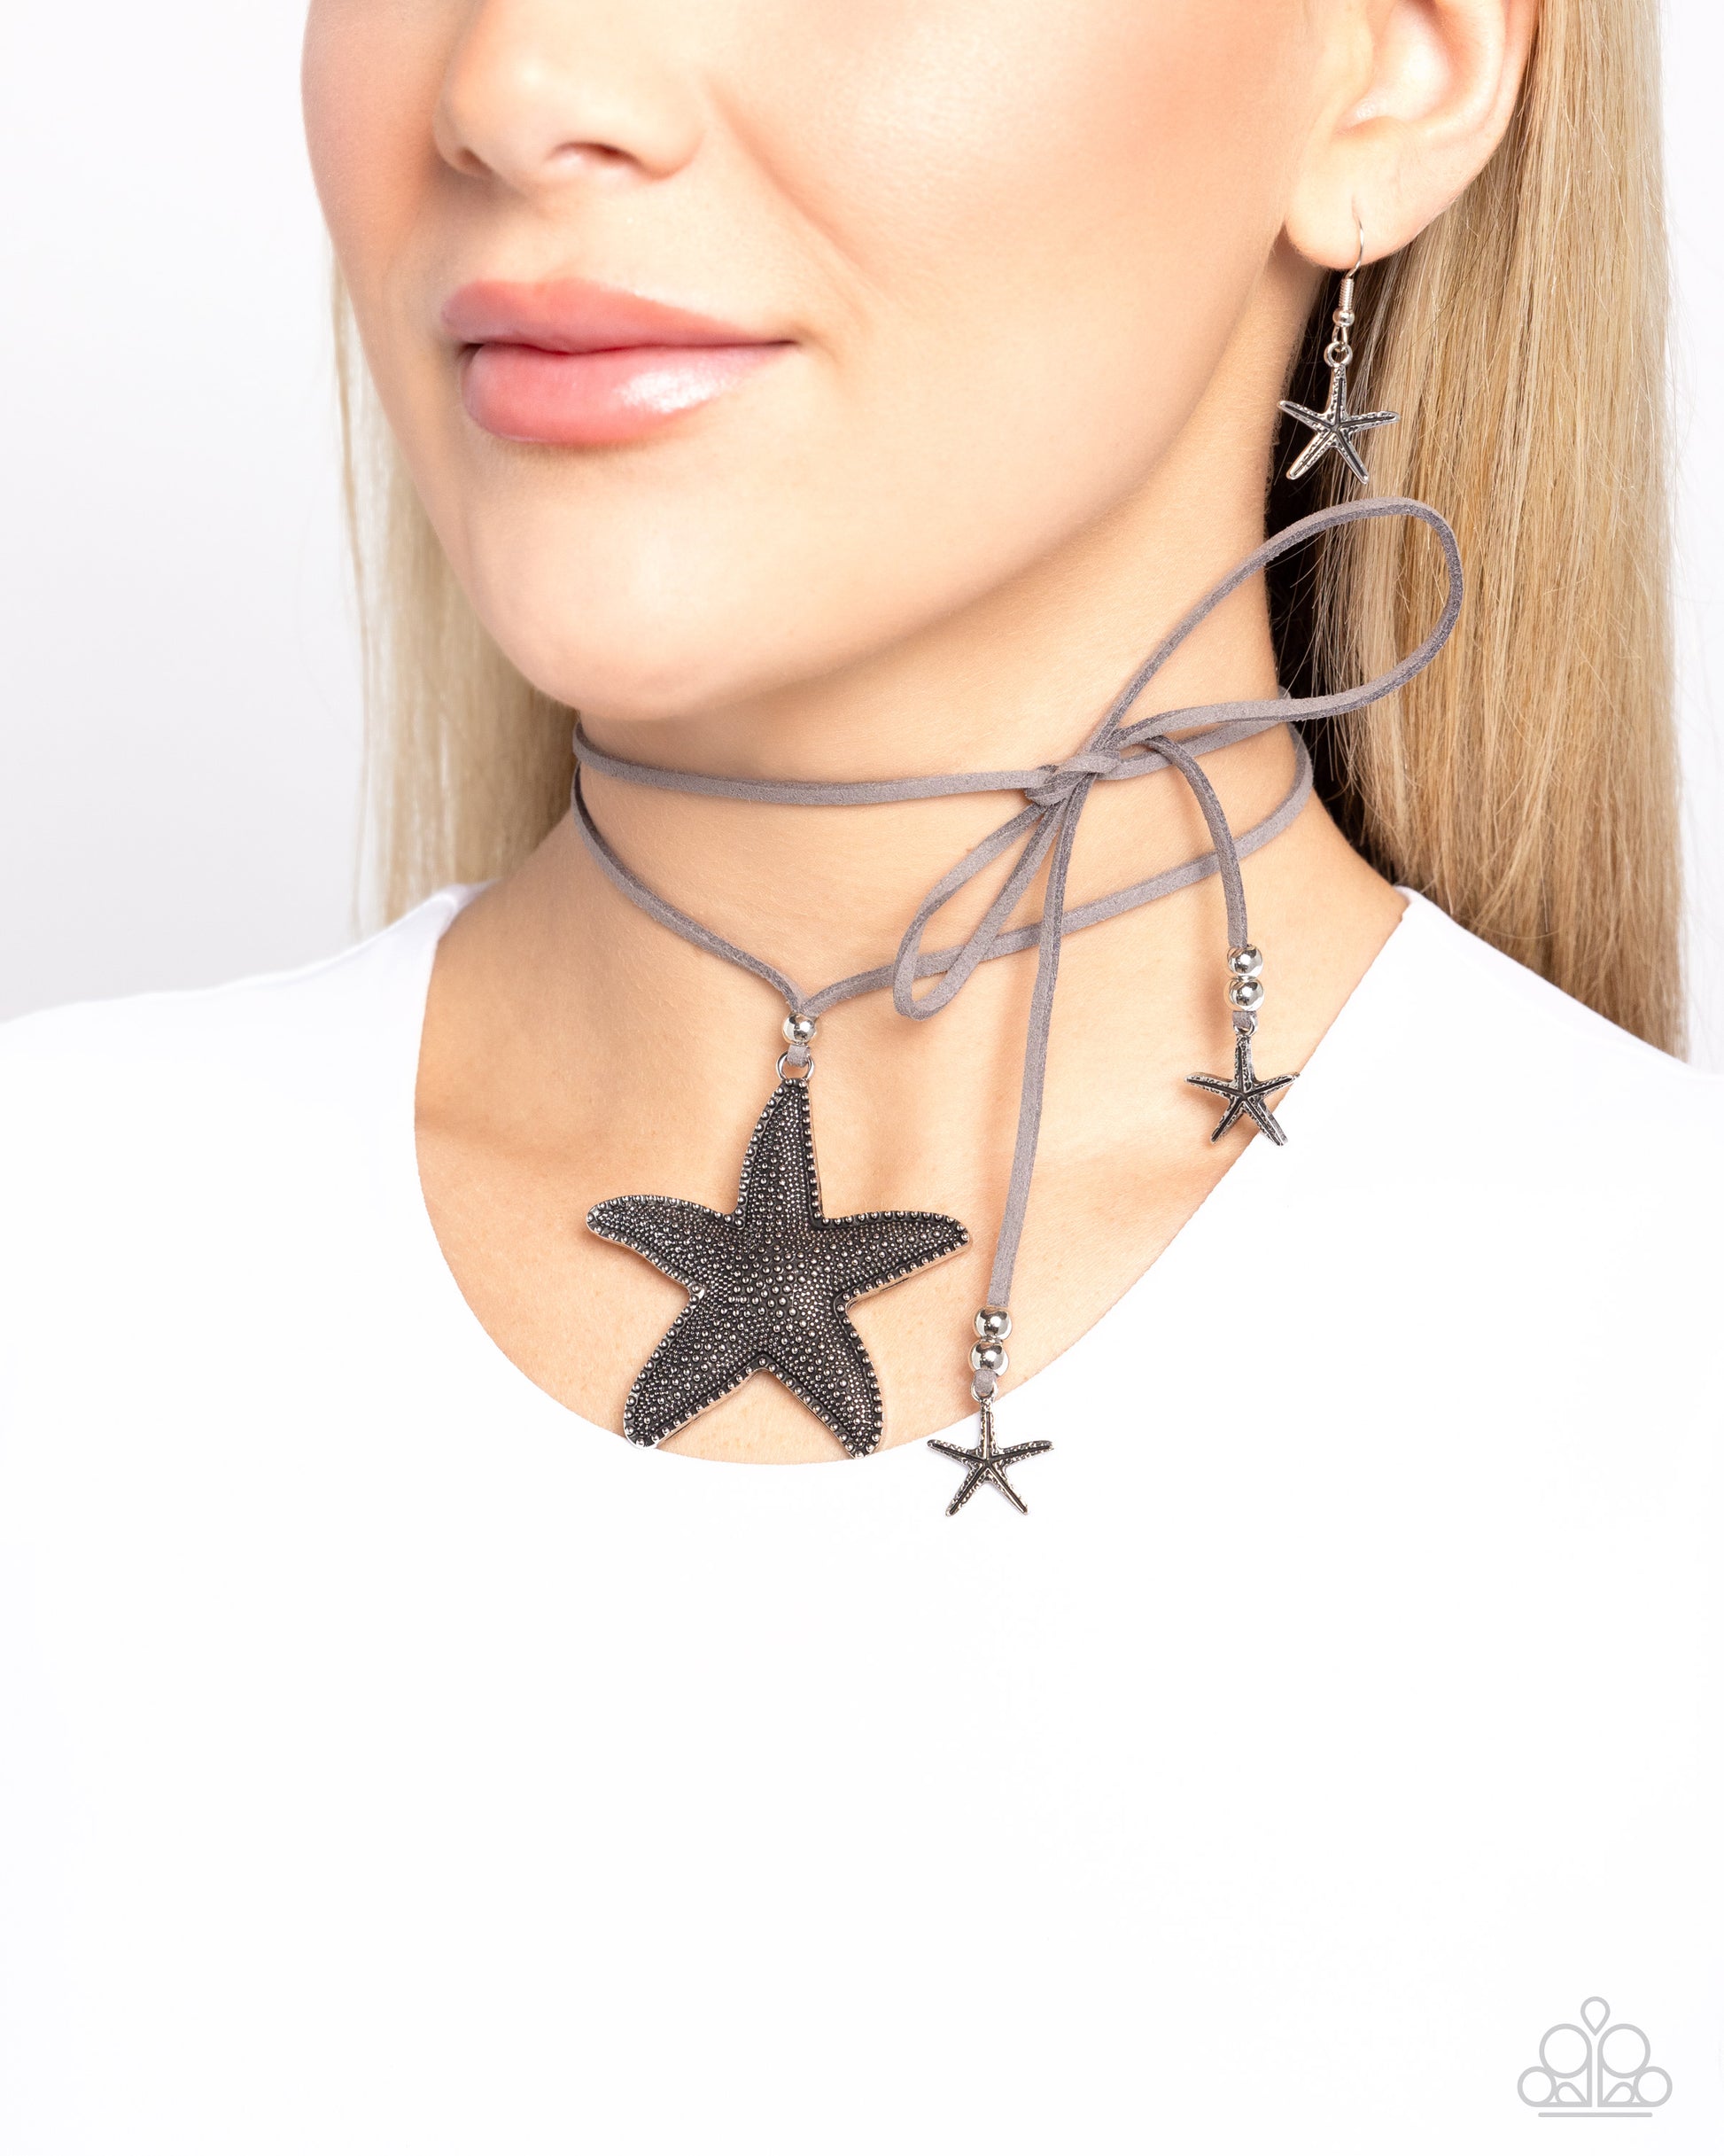 Paparazzi Accessories - Starfish Sentiment - Silver Necklaces infused with silver beaded and studded oversized starfish accents, a lengthened strip of gray suede double wraps around the neck, creating a layered choker necklace. Two whimsical silver starfish charms swing from the ends as a silver bead slides up and down the suede strands, adjusting the length of the coastal piece.  Sold as one individual necklace. Includes one pair of matching earrings.